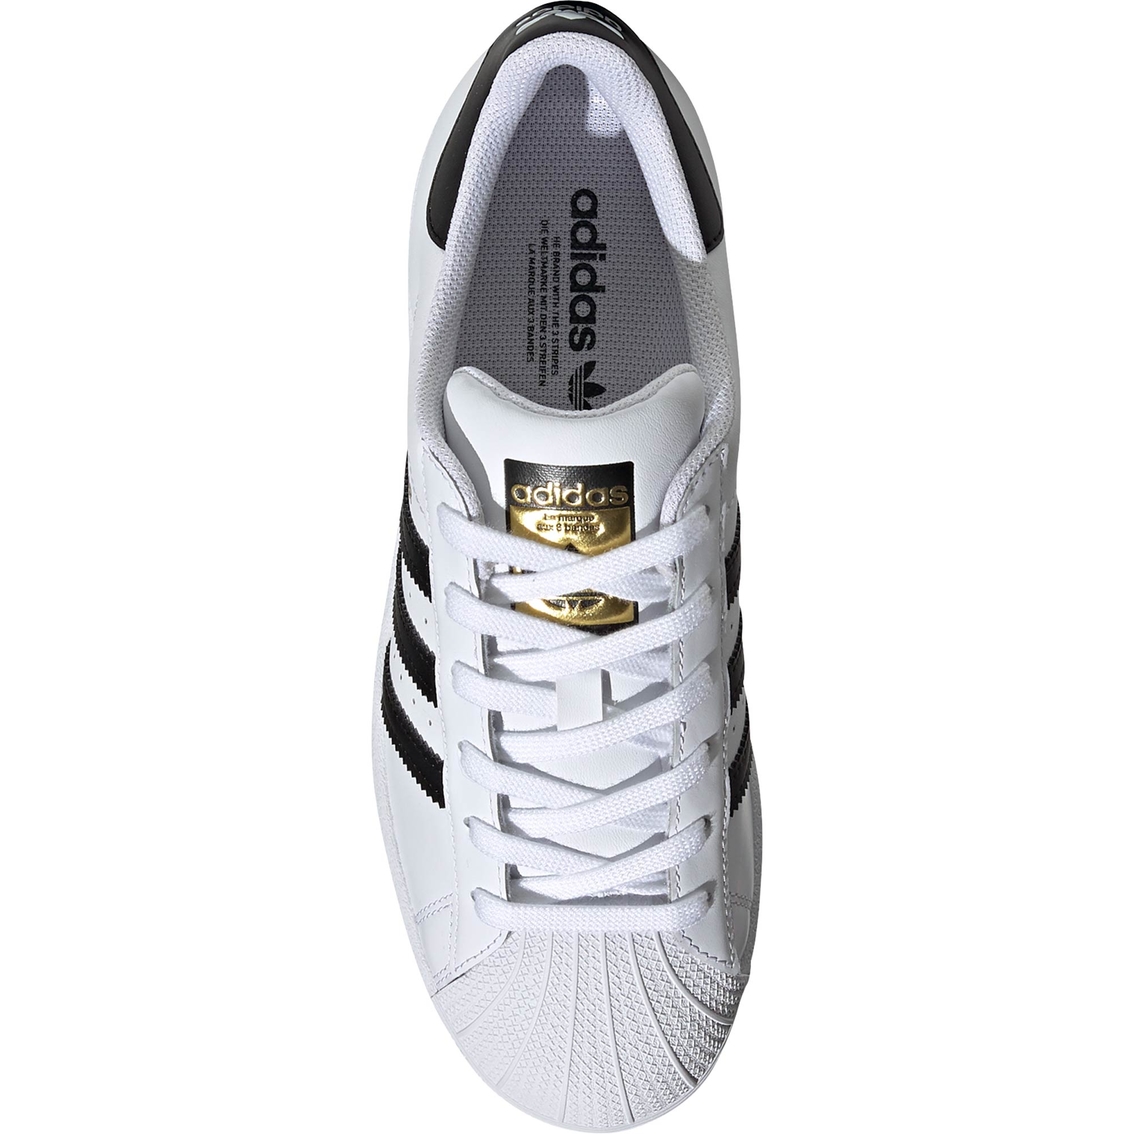 Adidas Women's Superstar Shoes - Image 4 of 5